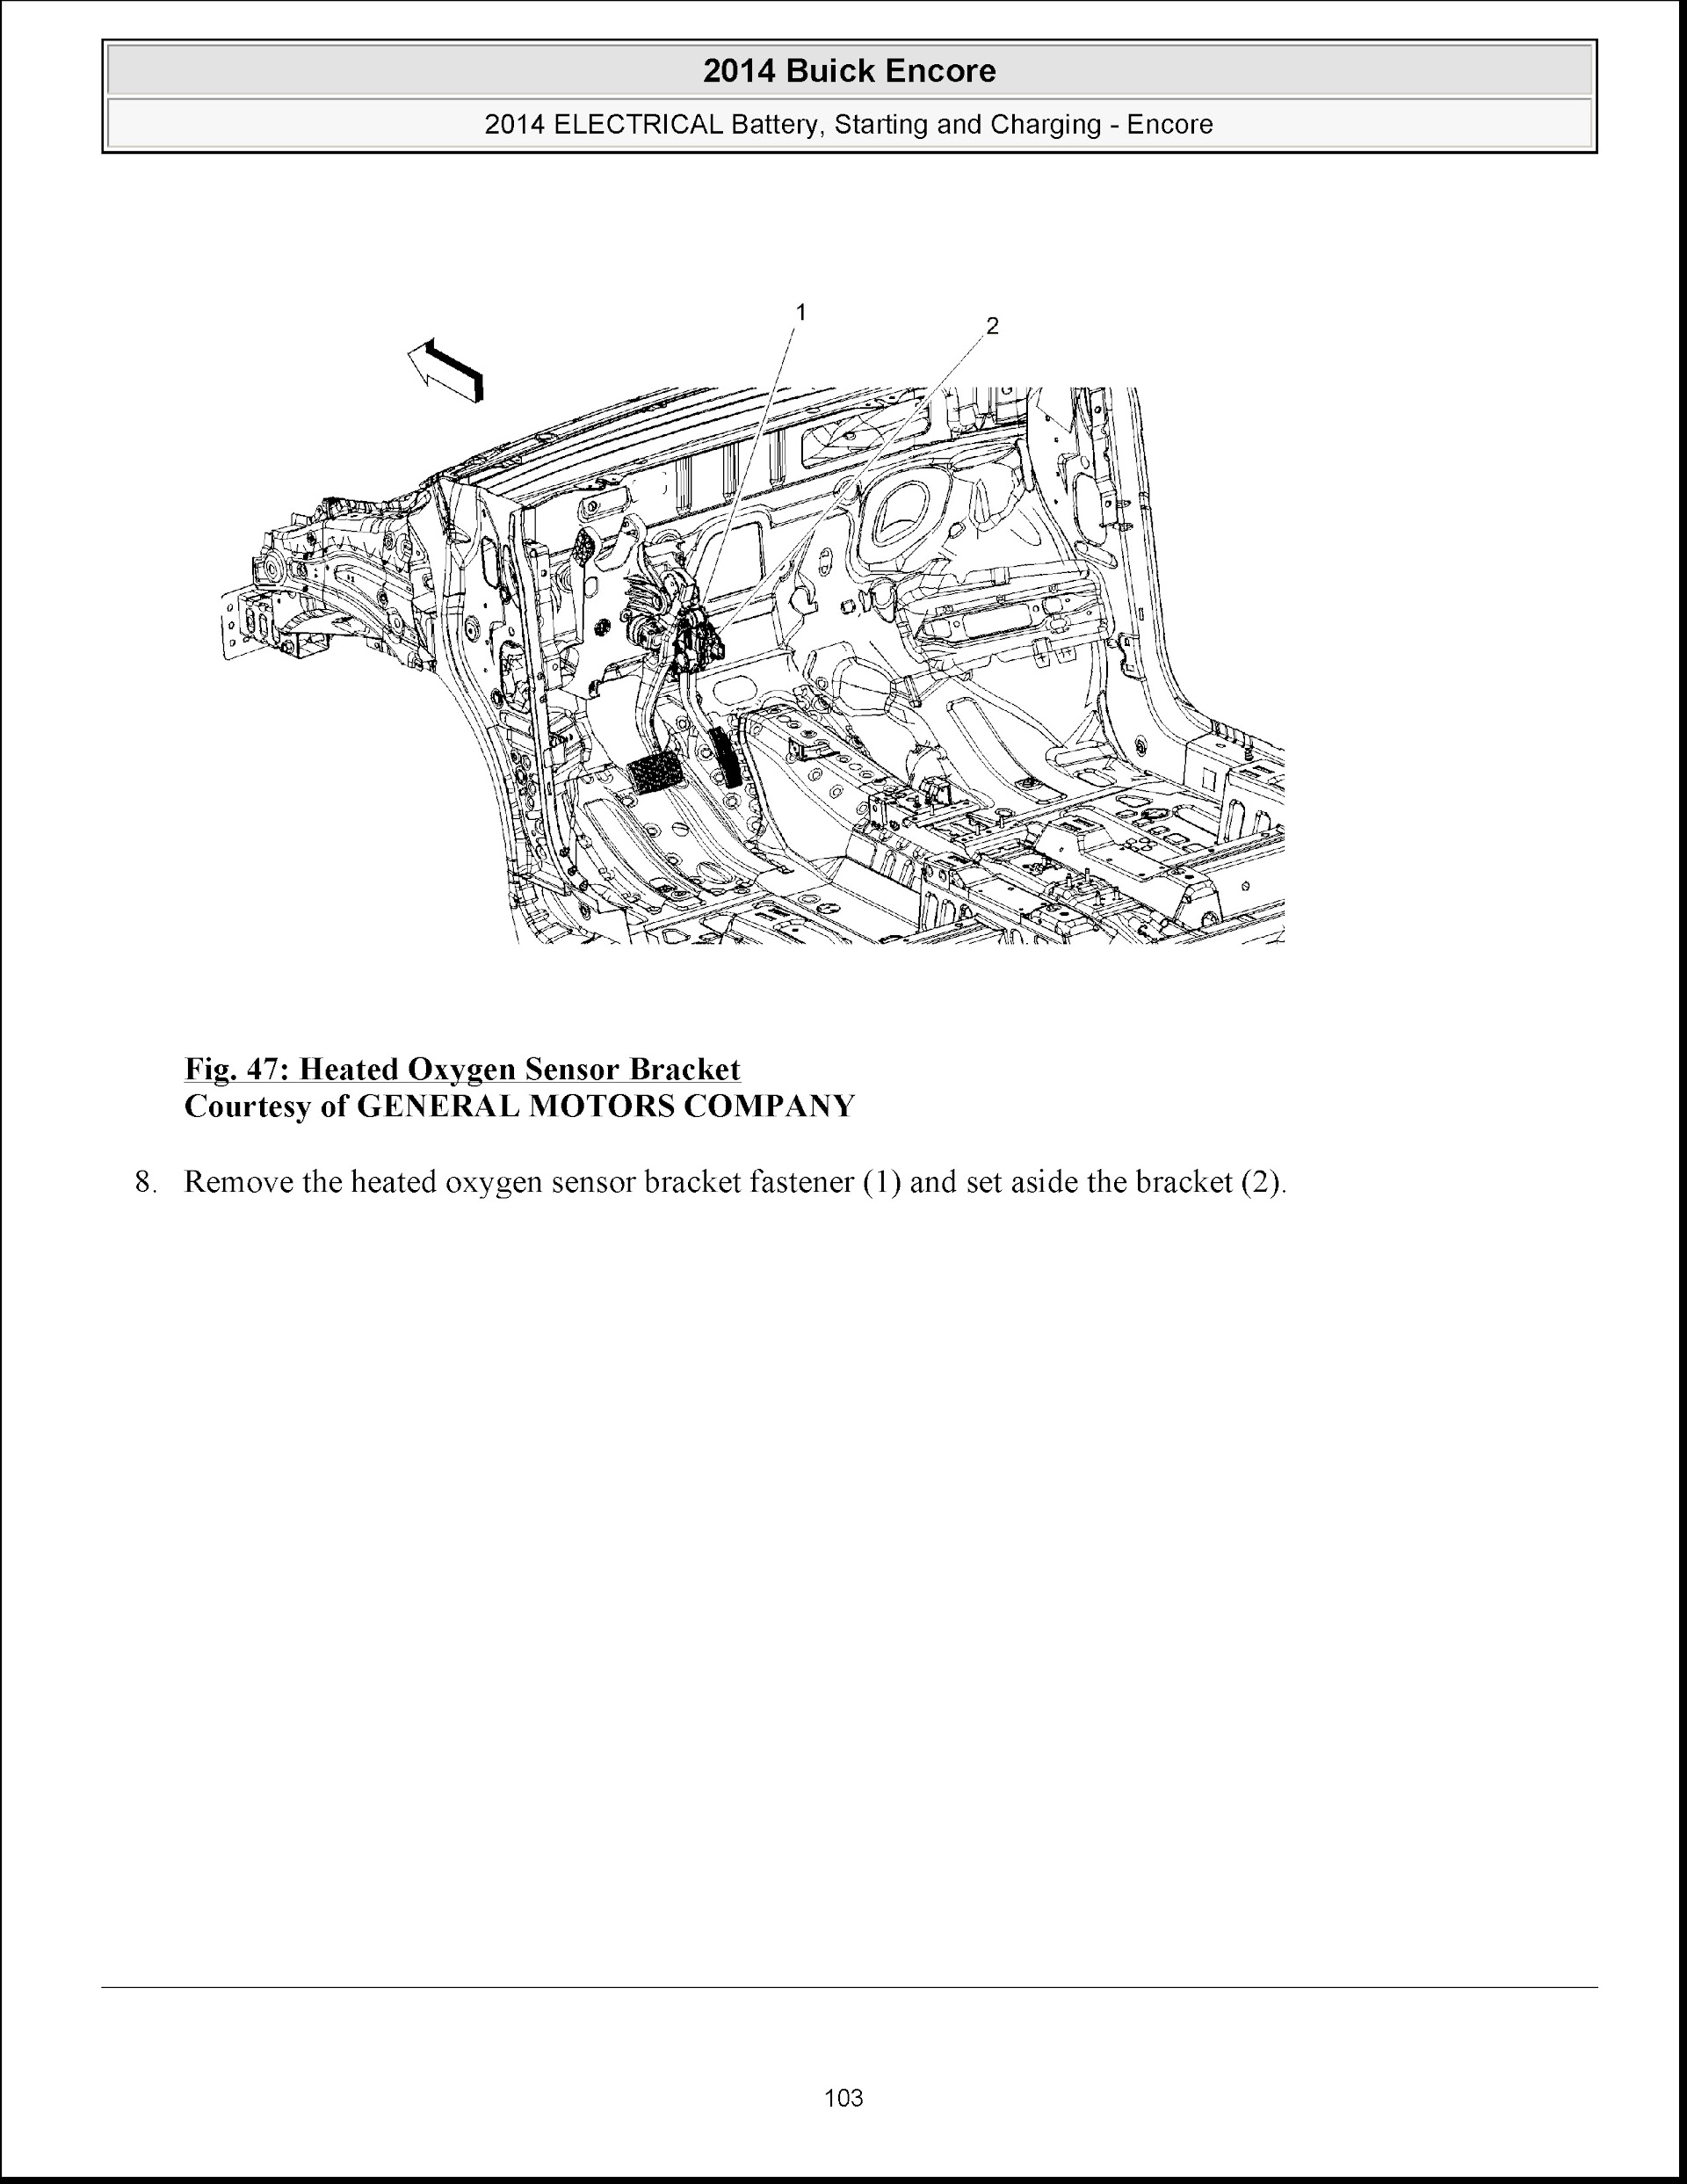 CONTENTS: 2014-2016 Buick Encore Repair Manual and Chevrolet Trax, engine mechanical